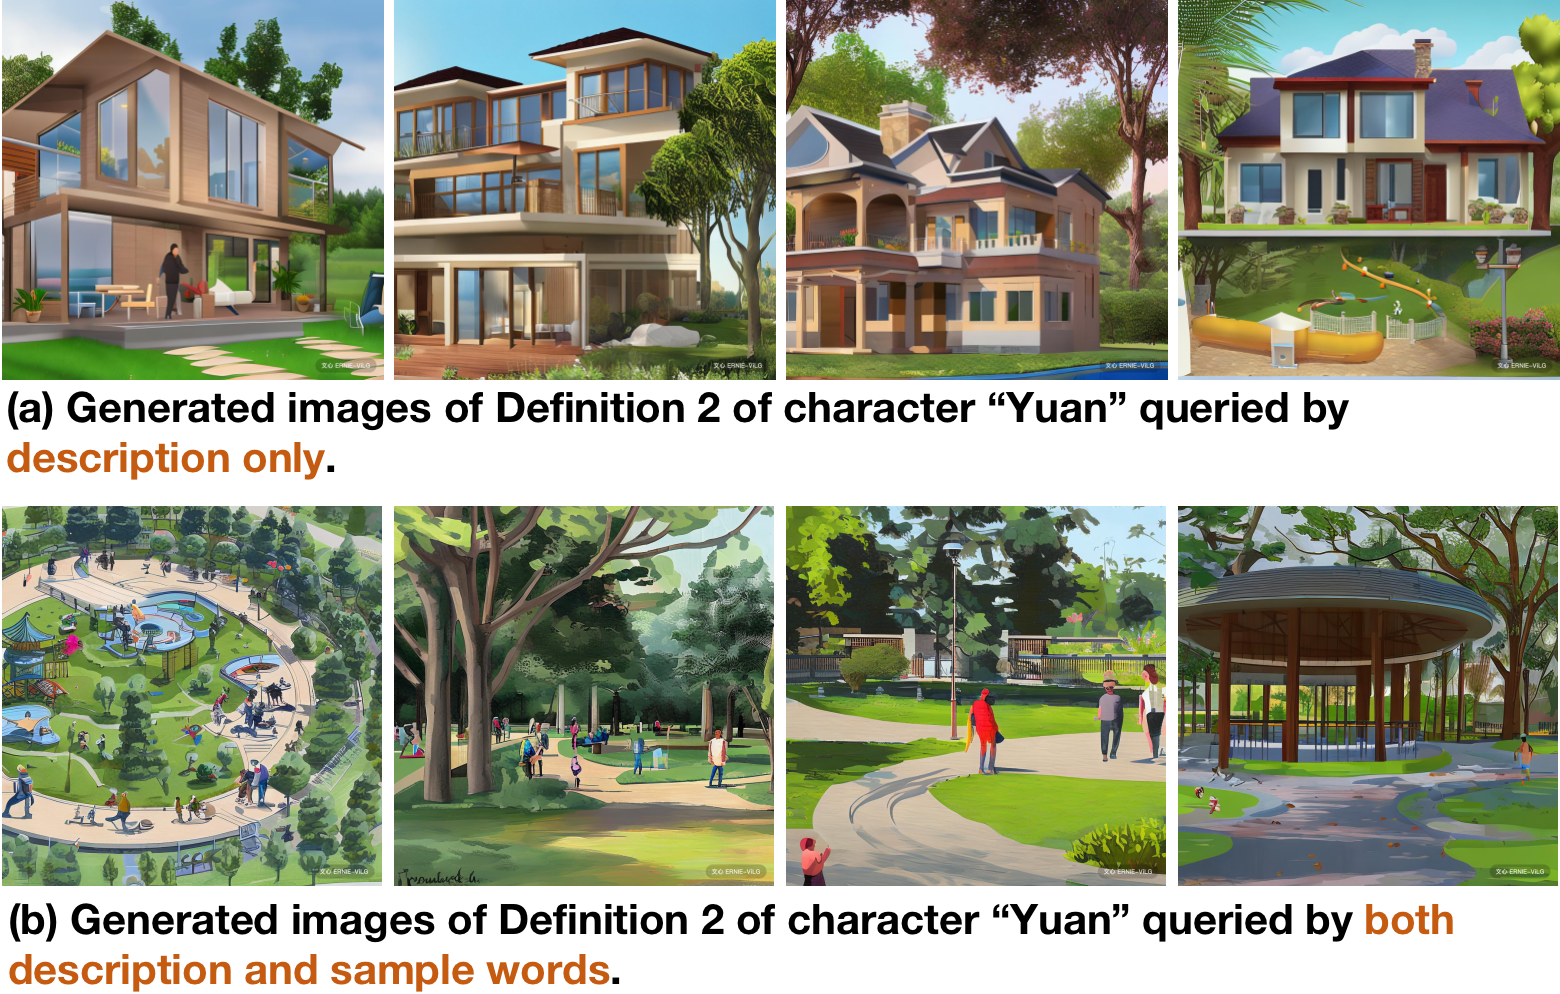 Image Generation with Different Painting Objects of \textbf{Definition 2} of Character “Yuan”